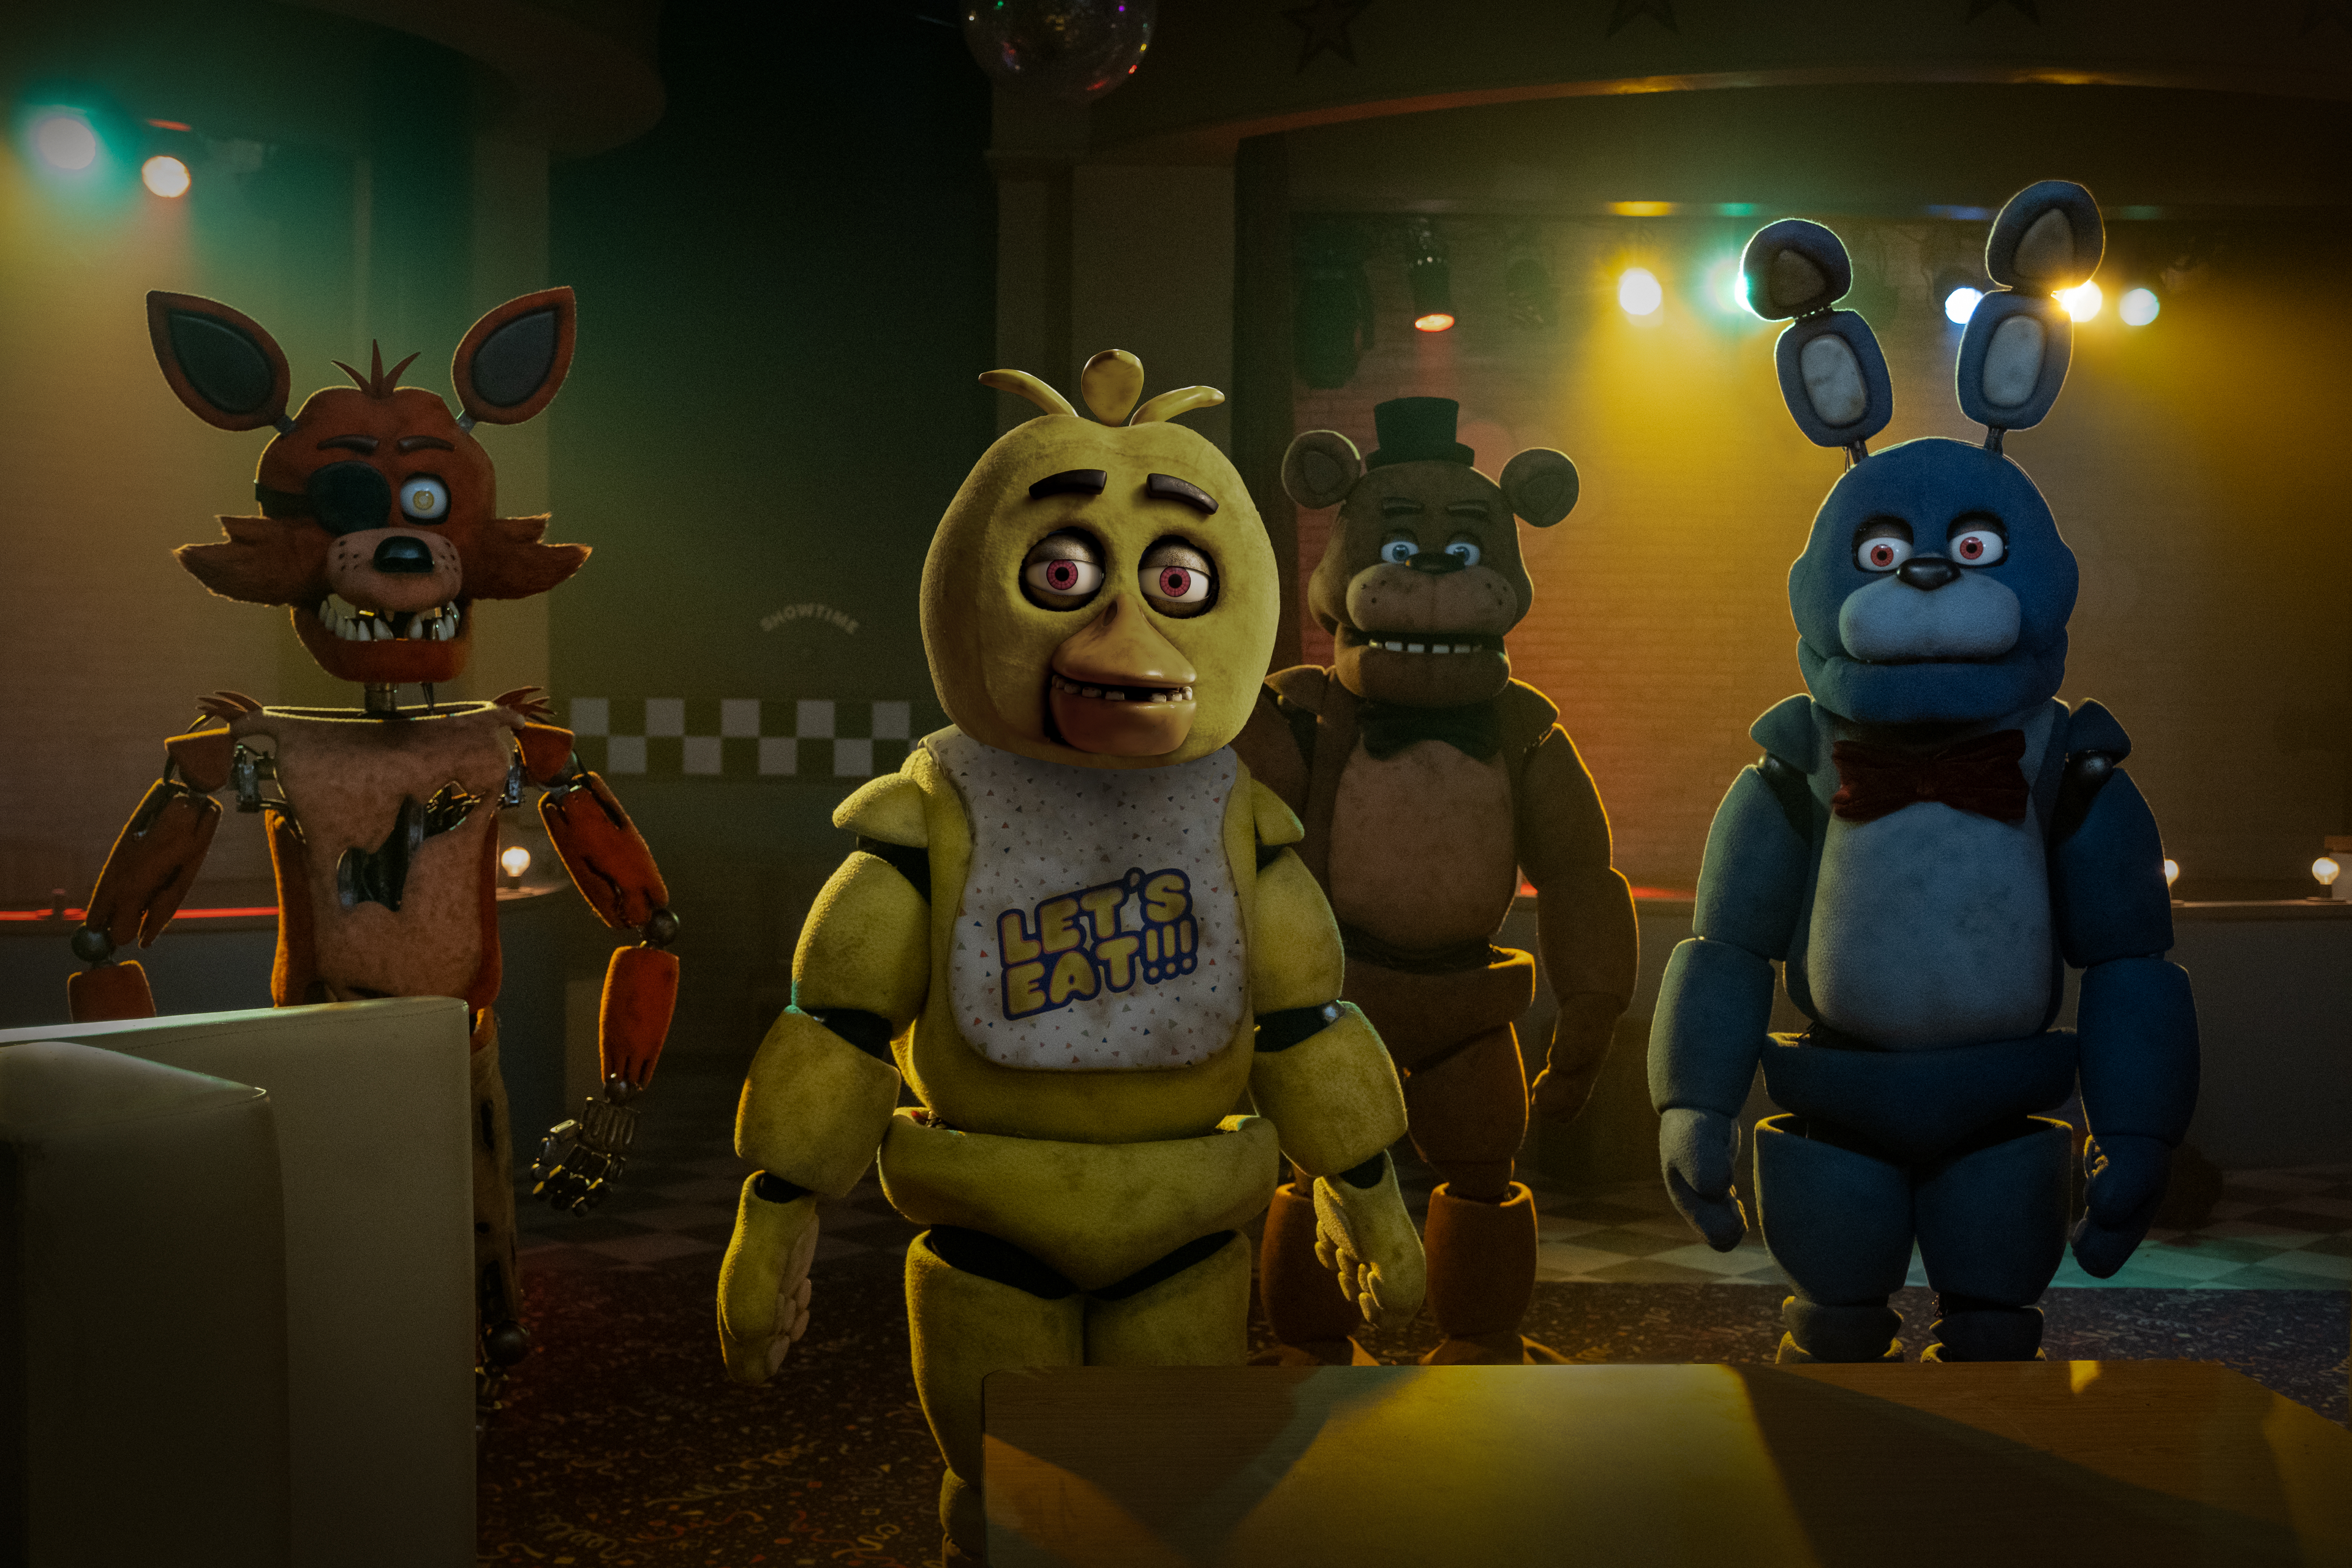 HD desktop wallpaper featuring characters from Five Nights at Freddy's game in a dimly lit room for fans of the series.